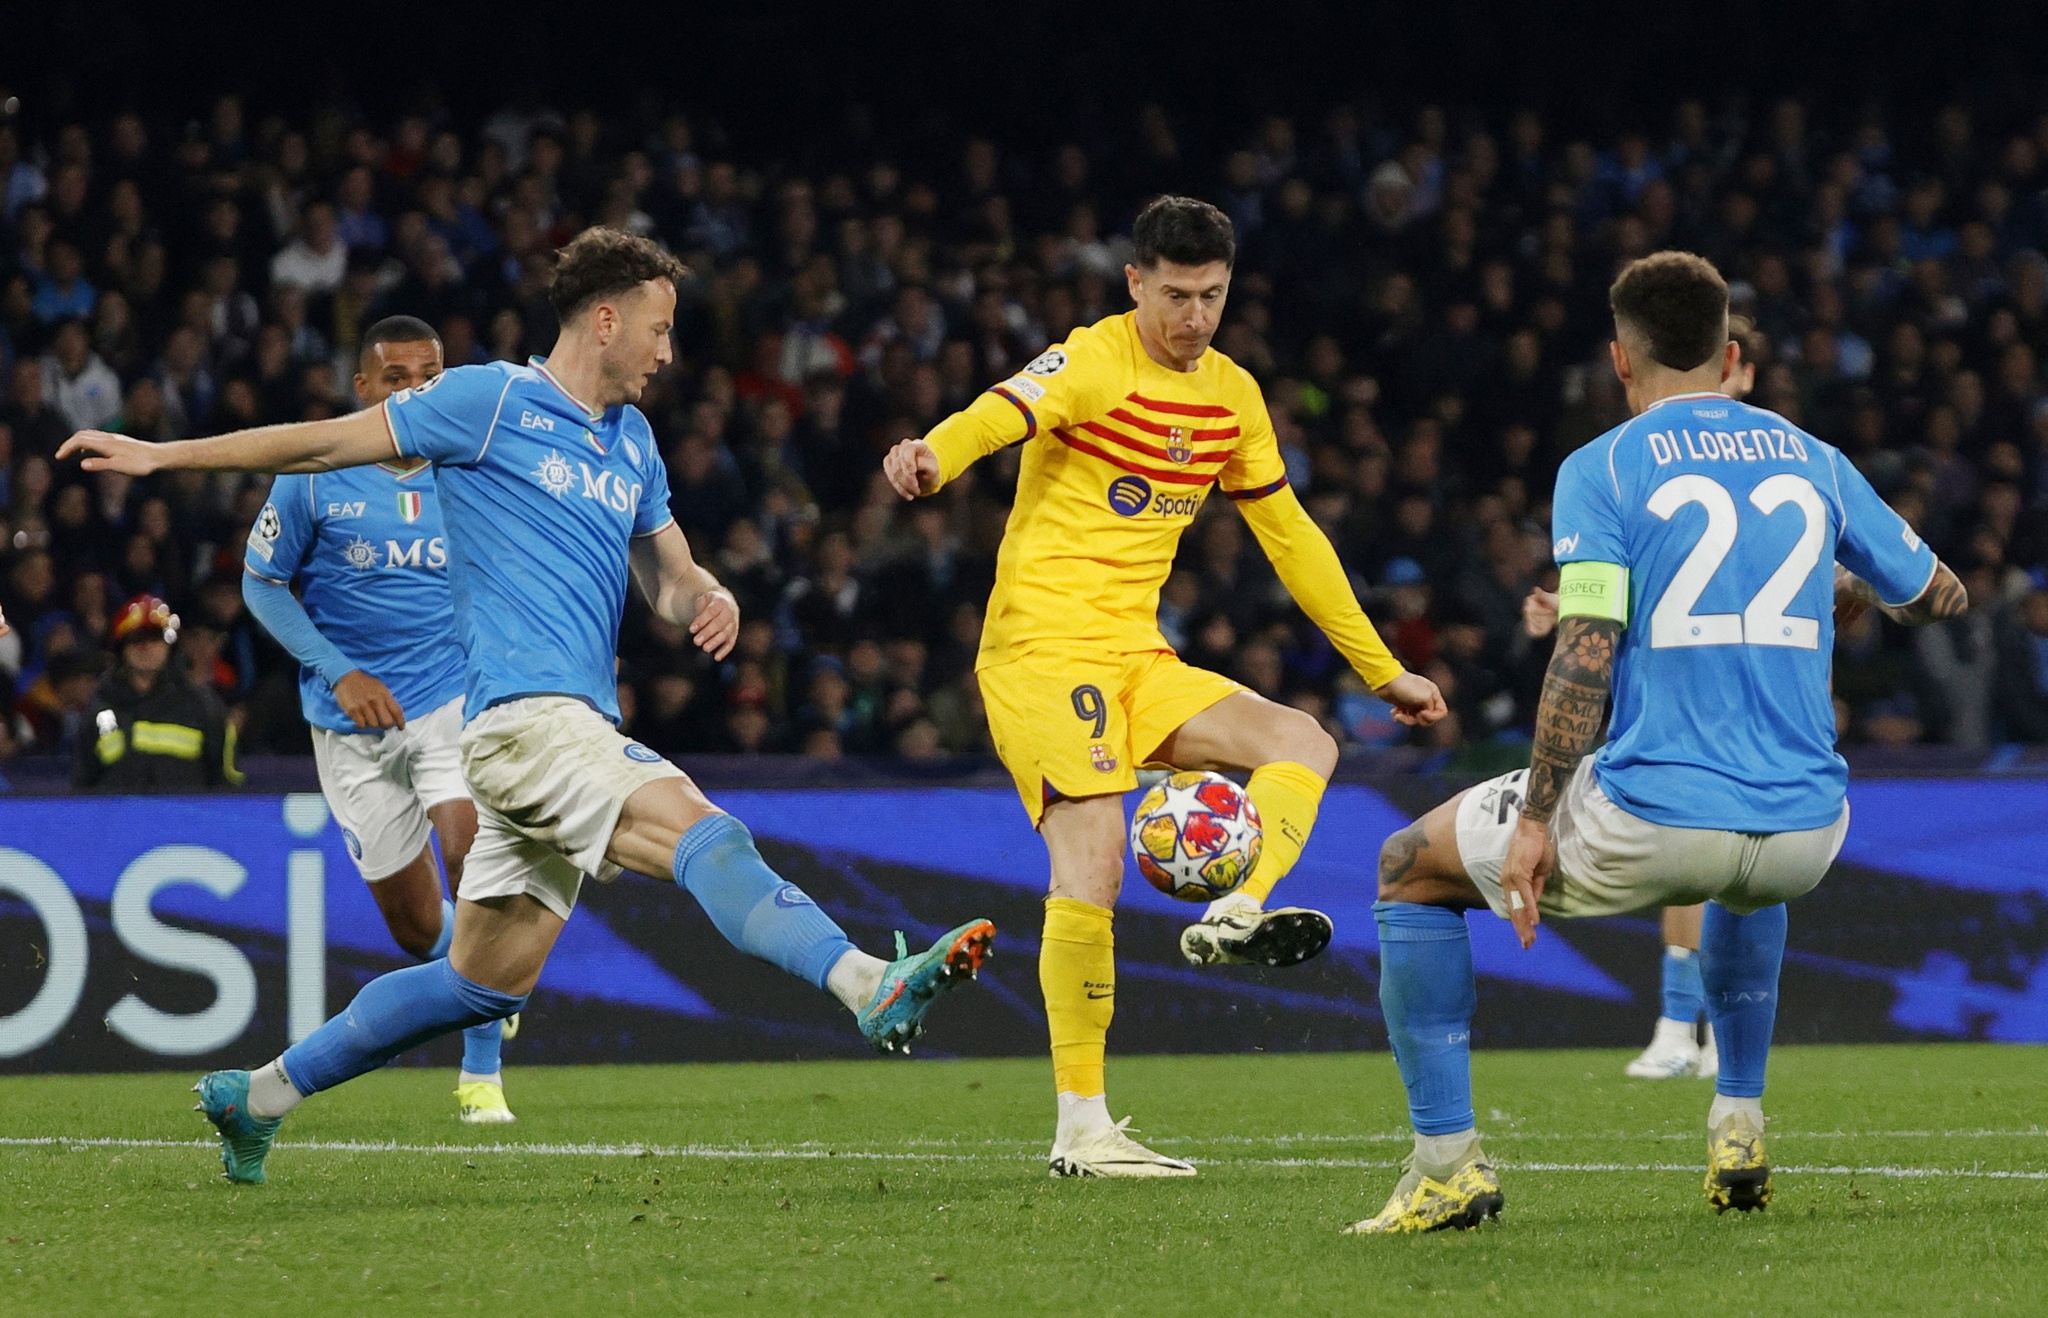 Naples and Barcelona Champions League Duel Ends in 1-1 Draw: Analysis and Highlights